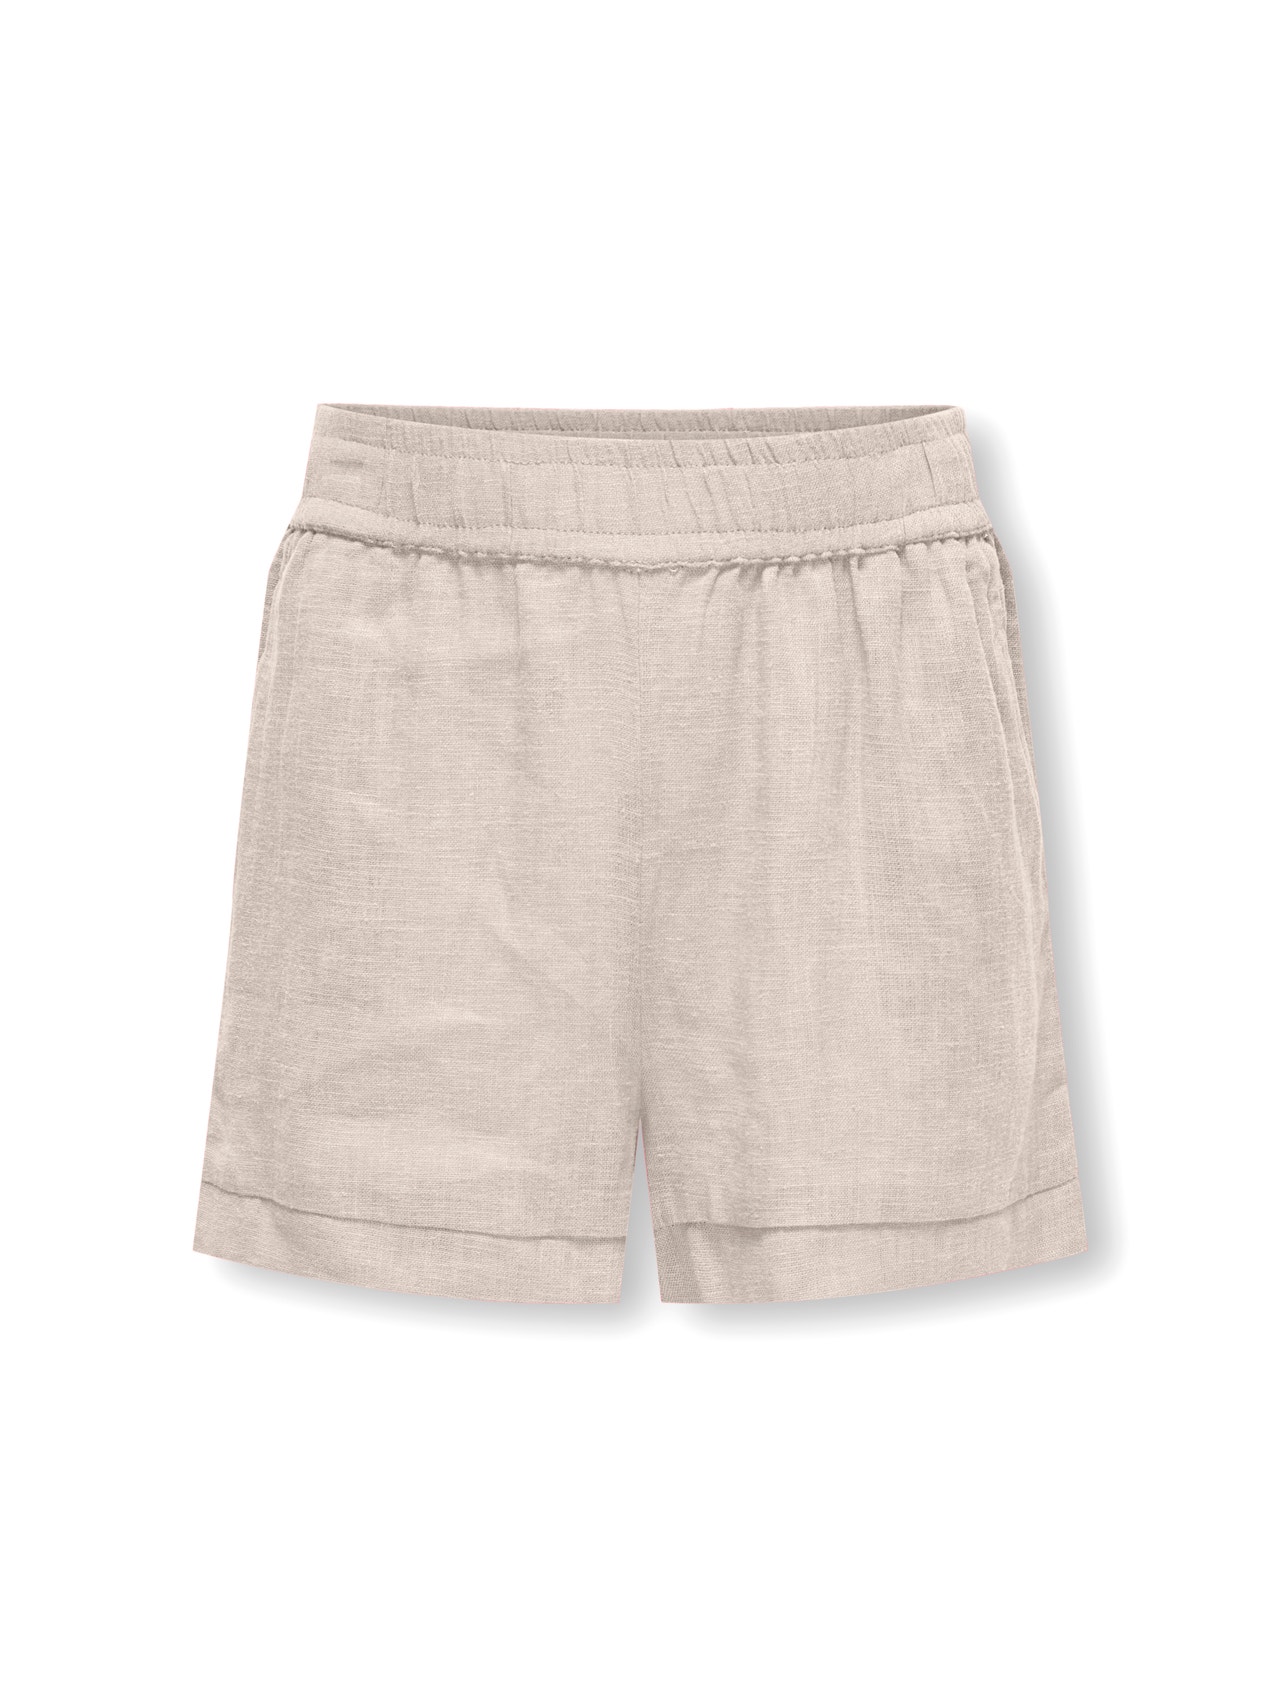 ONLY Regular fit Shorts -Pumice Stone - 15325755